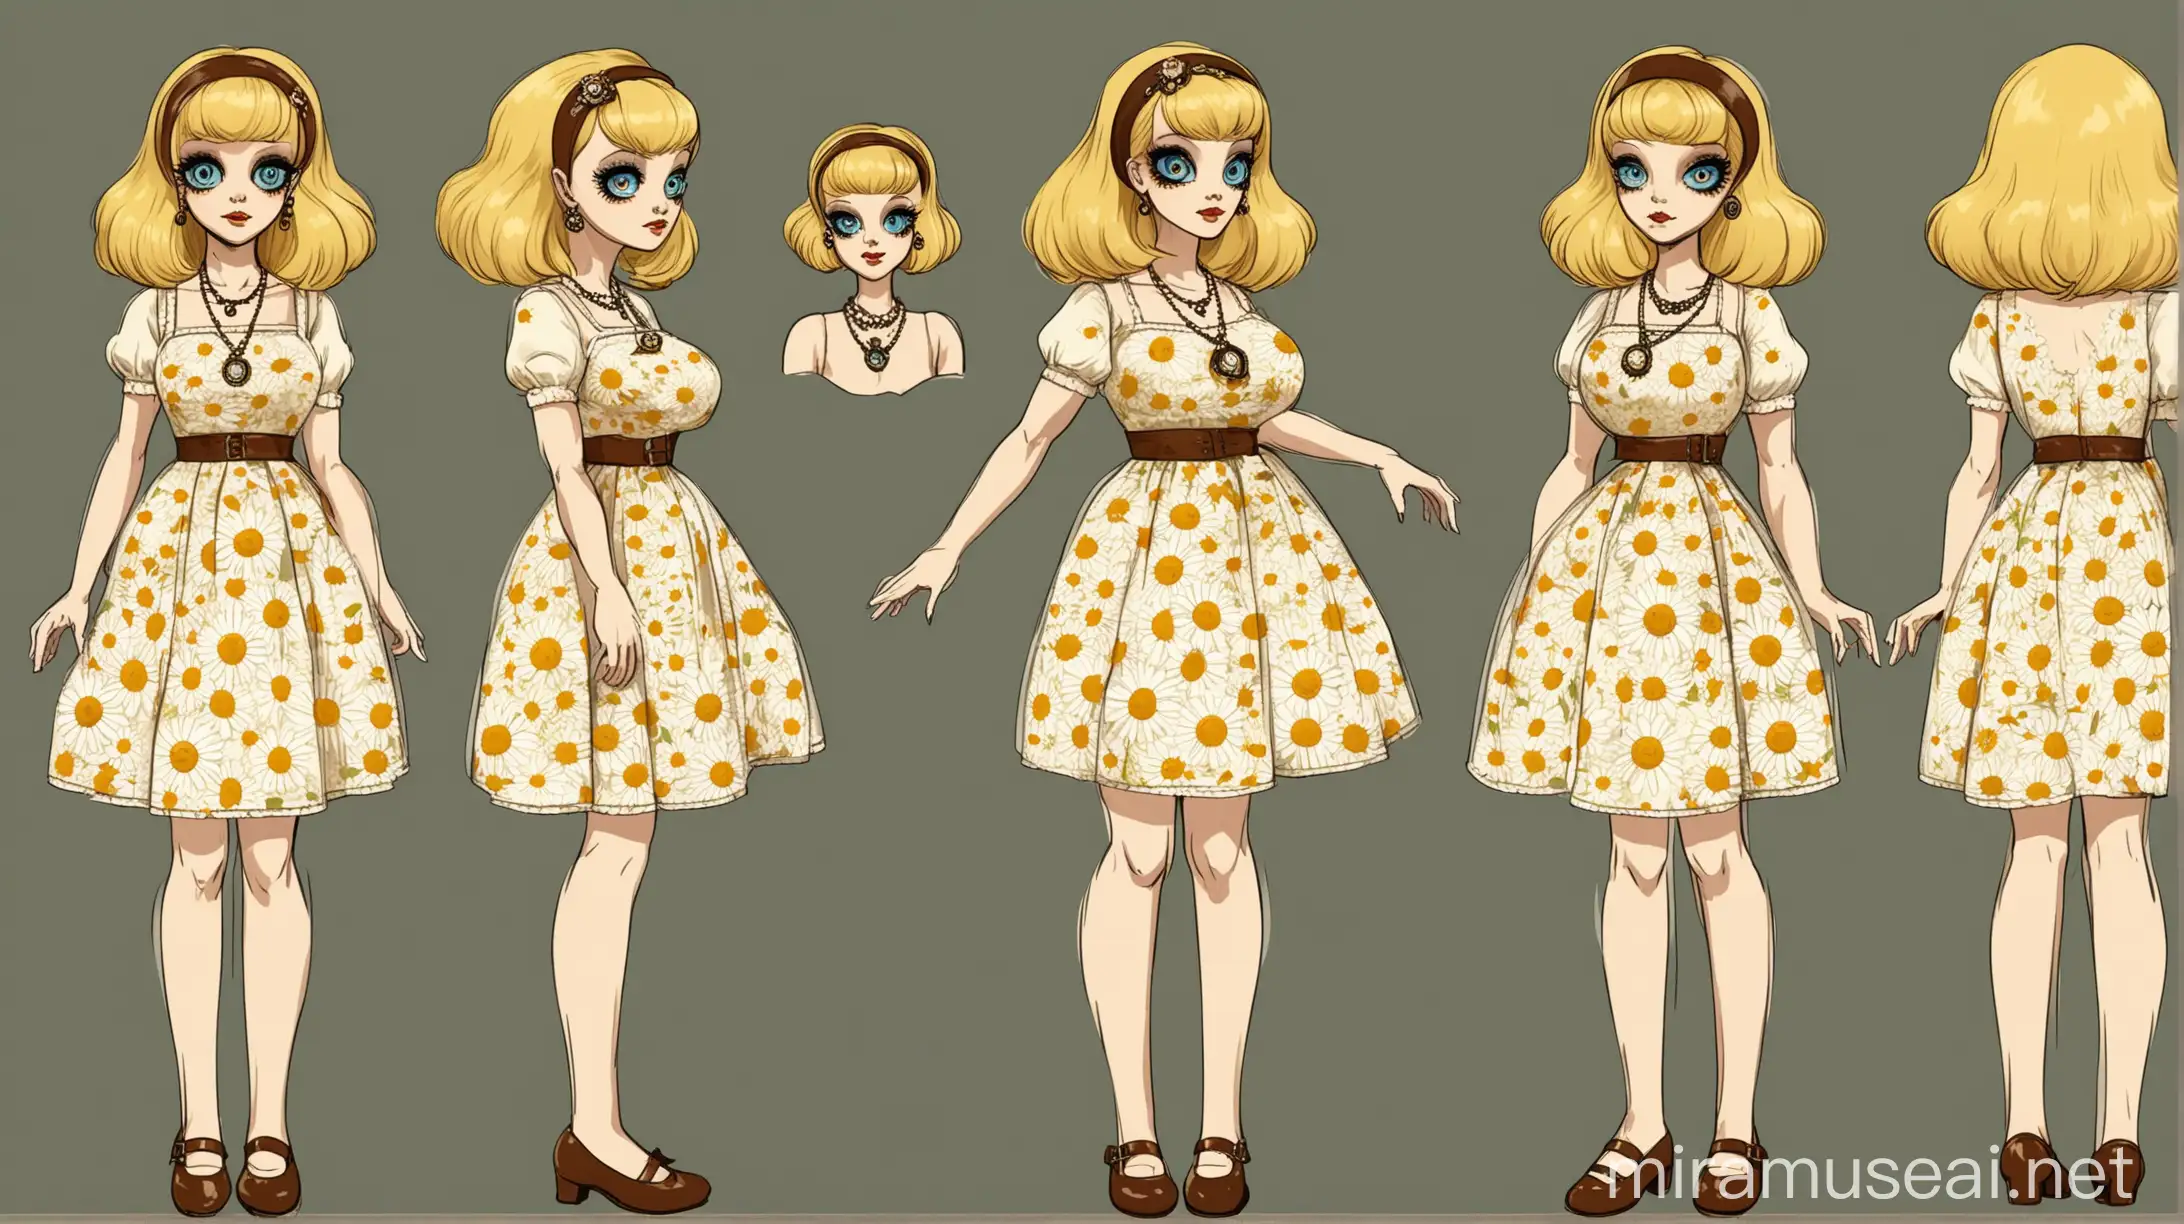 Ranfren, Character reference sheet, Name: Daisy, Species: Cryptid (humanoid appearance), Build: Hourglass figure with big breasts and thick thighs. Skin: Pale white.
Hair: Blonde, typically styled in a way that complements her retro, vintage fashion sense.
Eyes:
False Eyes: Wide and always contoured with makeup, giving her a distinctive, almost doll-like appearance.
Real Eyes: Located under her false eyes, usually closed, resembling blush marks when not open.
Clothing: Style: Always wears cute dresses, often with floral prints.
Accessories: Hair Accessories: Ribbons, headbands, or vintage clips.
Jewelry: Delicate necklaces, often with small flower pendants, and vintage earrings.
Footwear: Mary Janes or vintage-style shoes that complement her dresses.